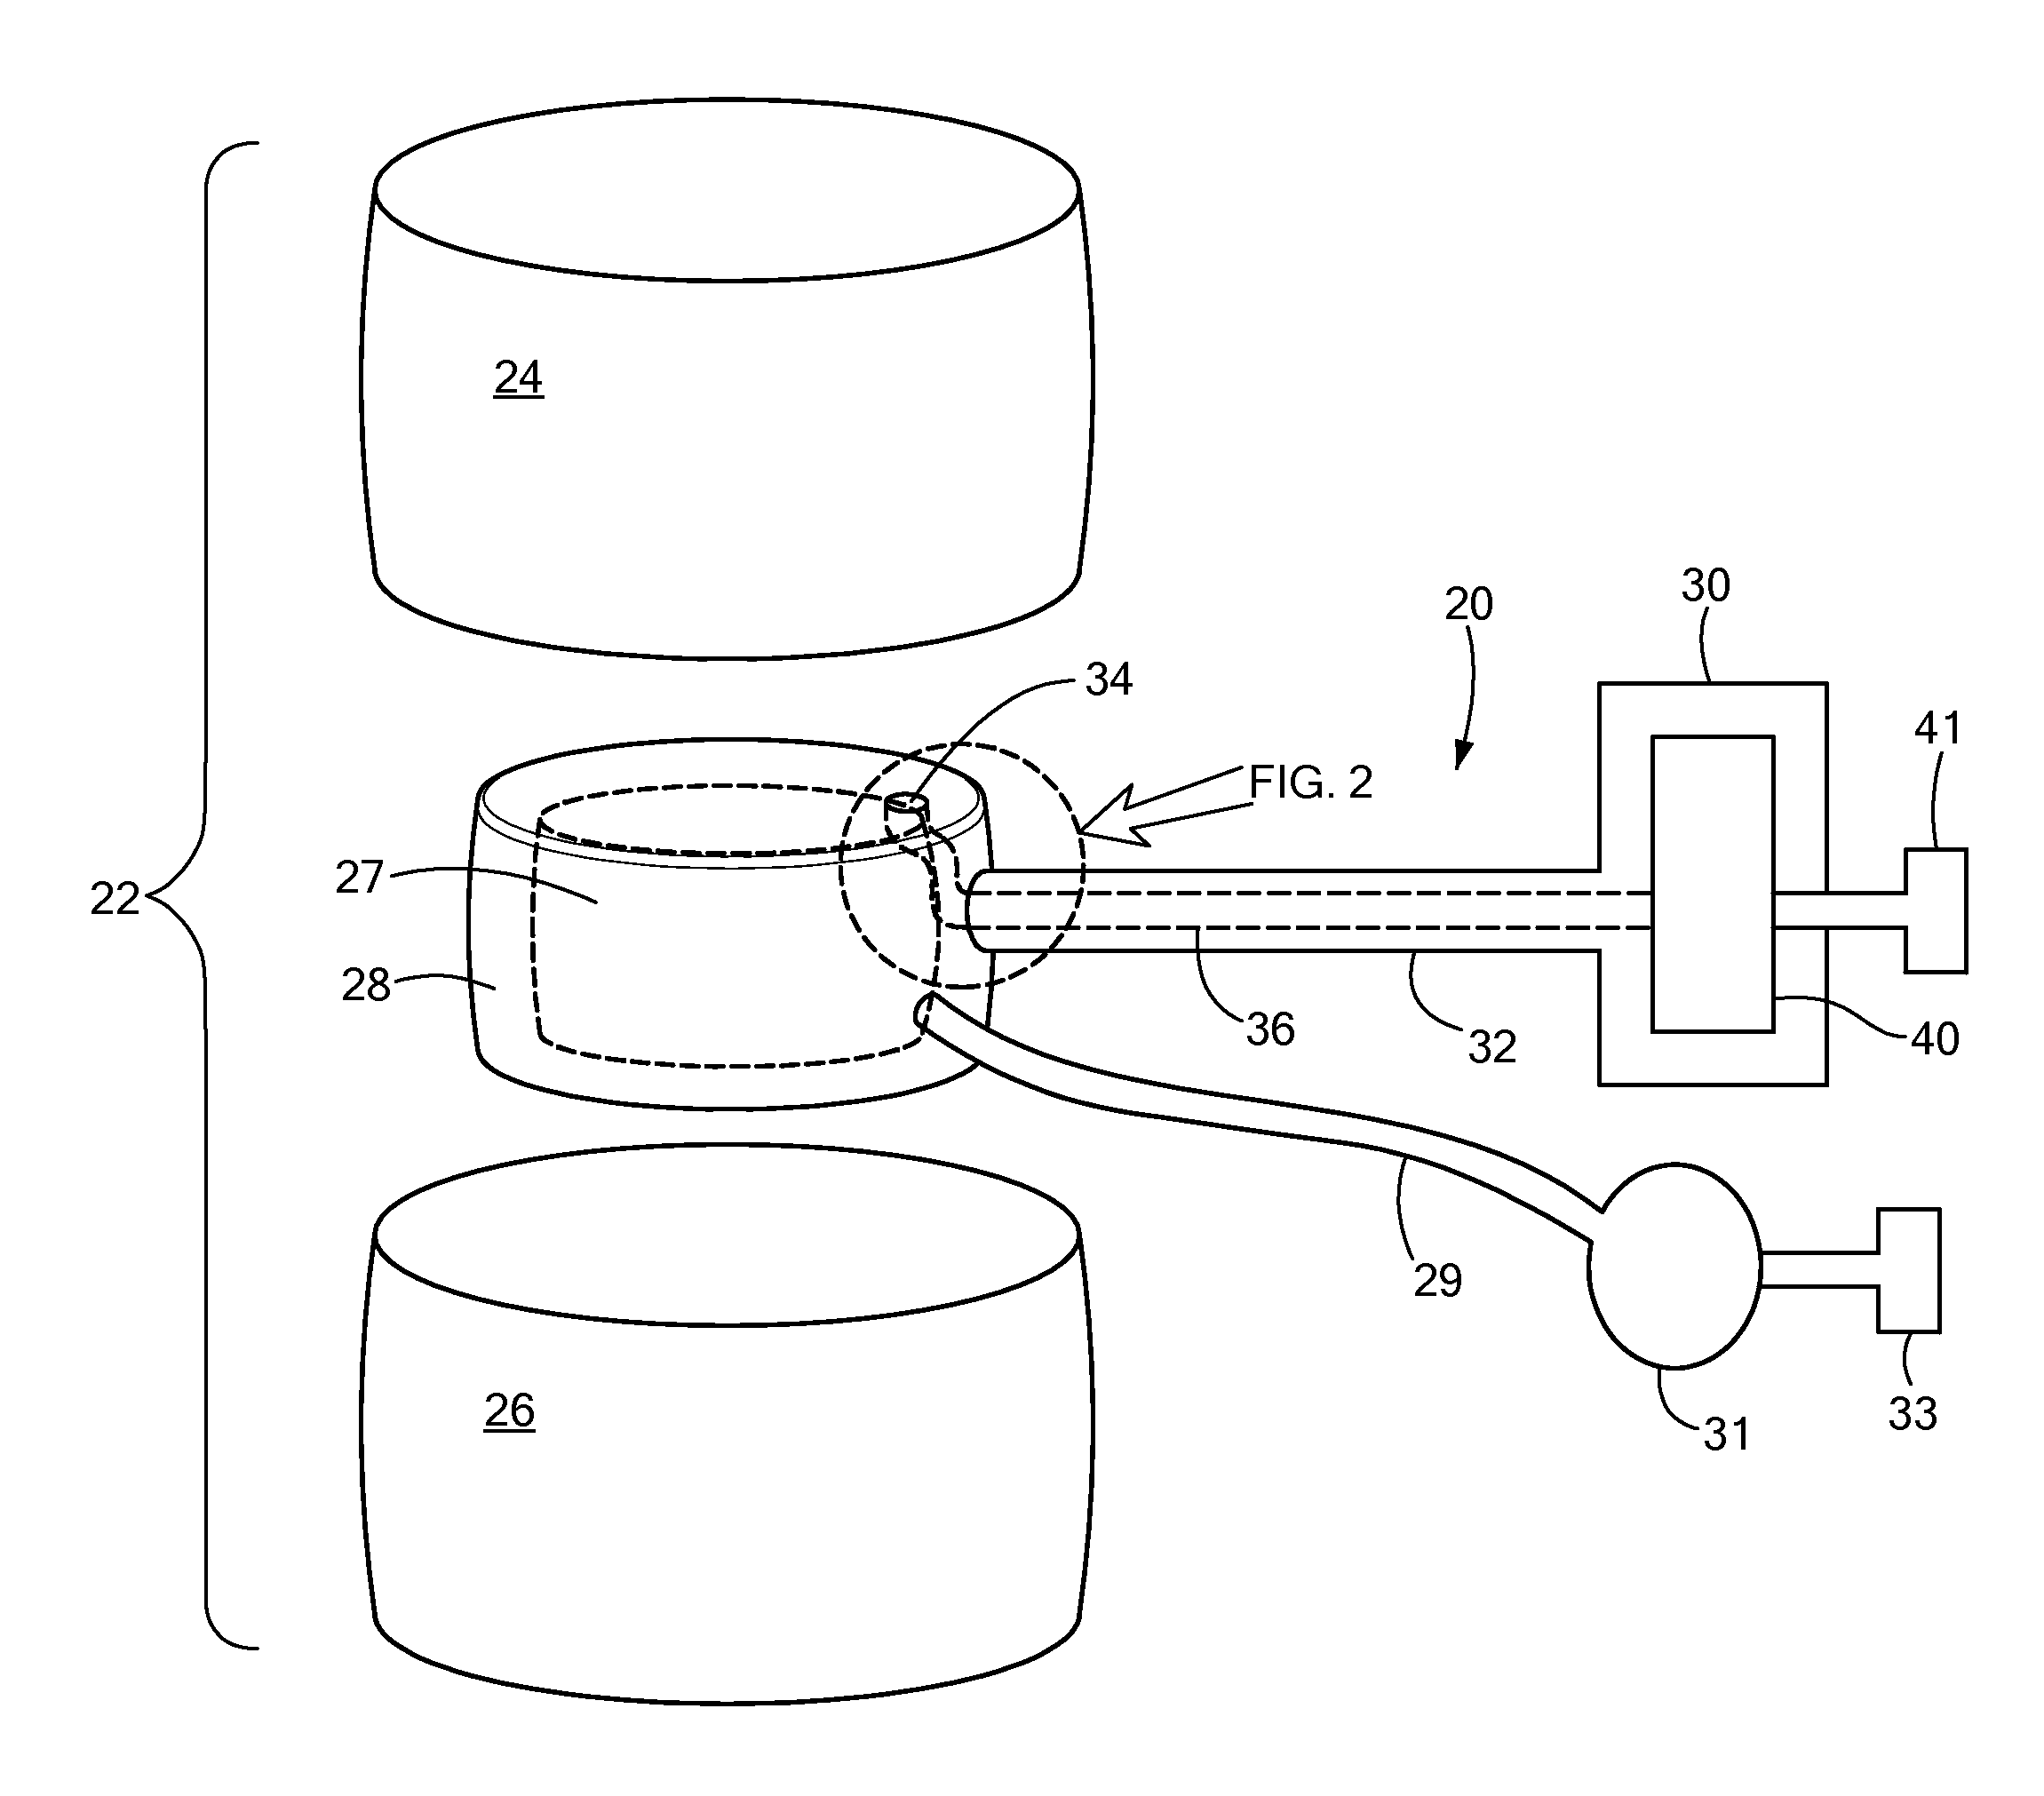 Drug Delivery Device and Method